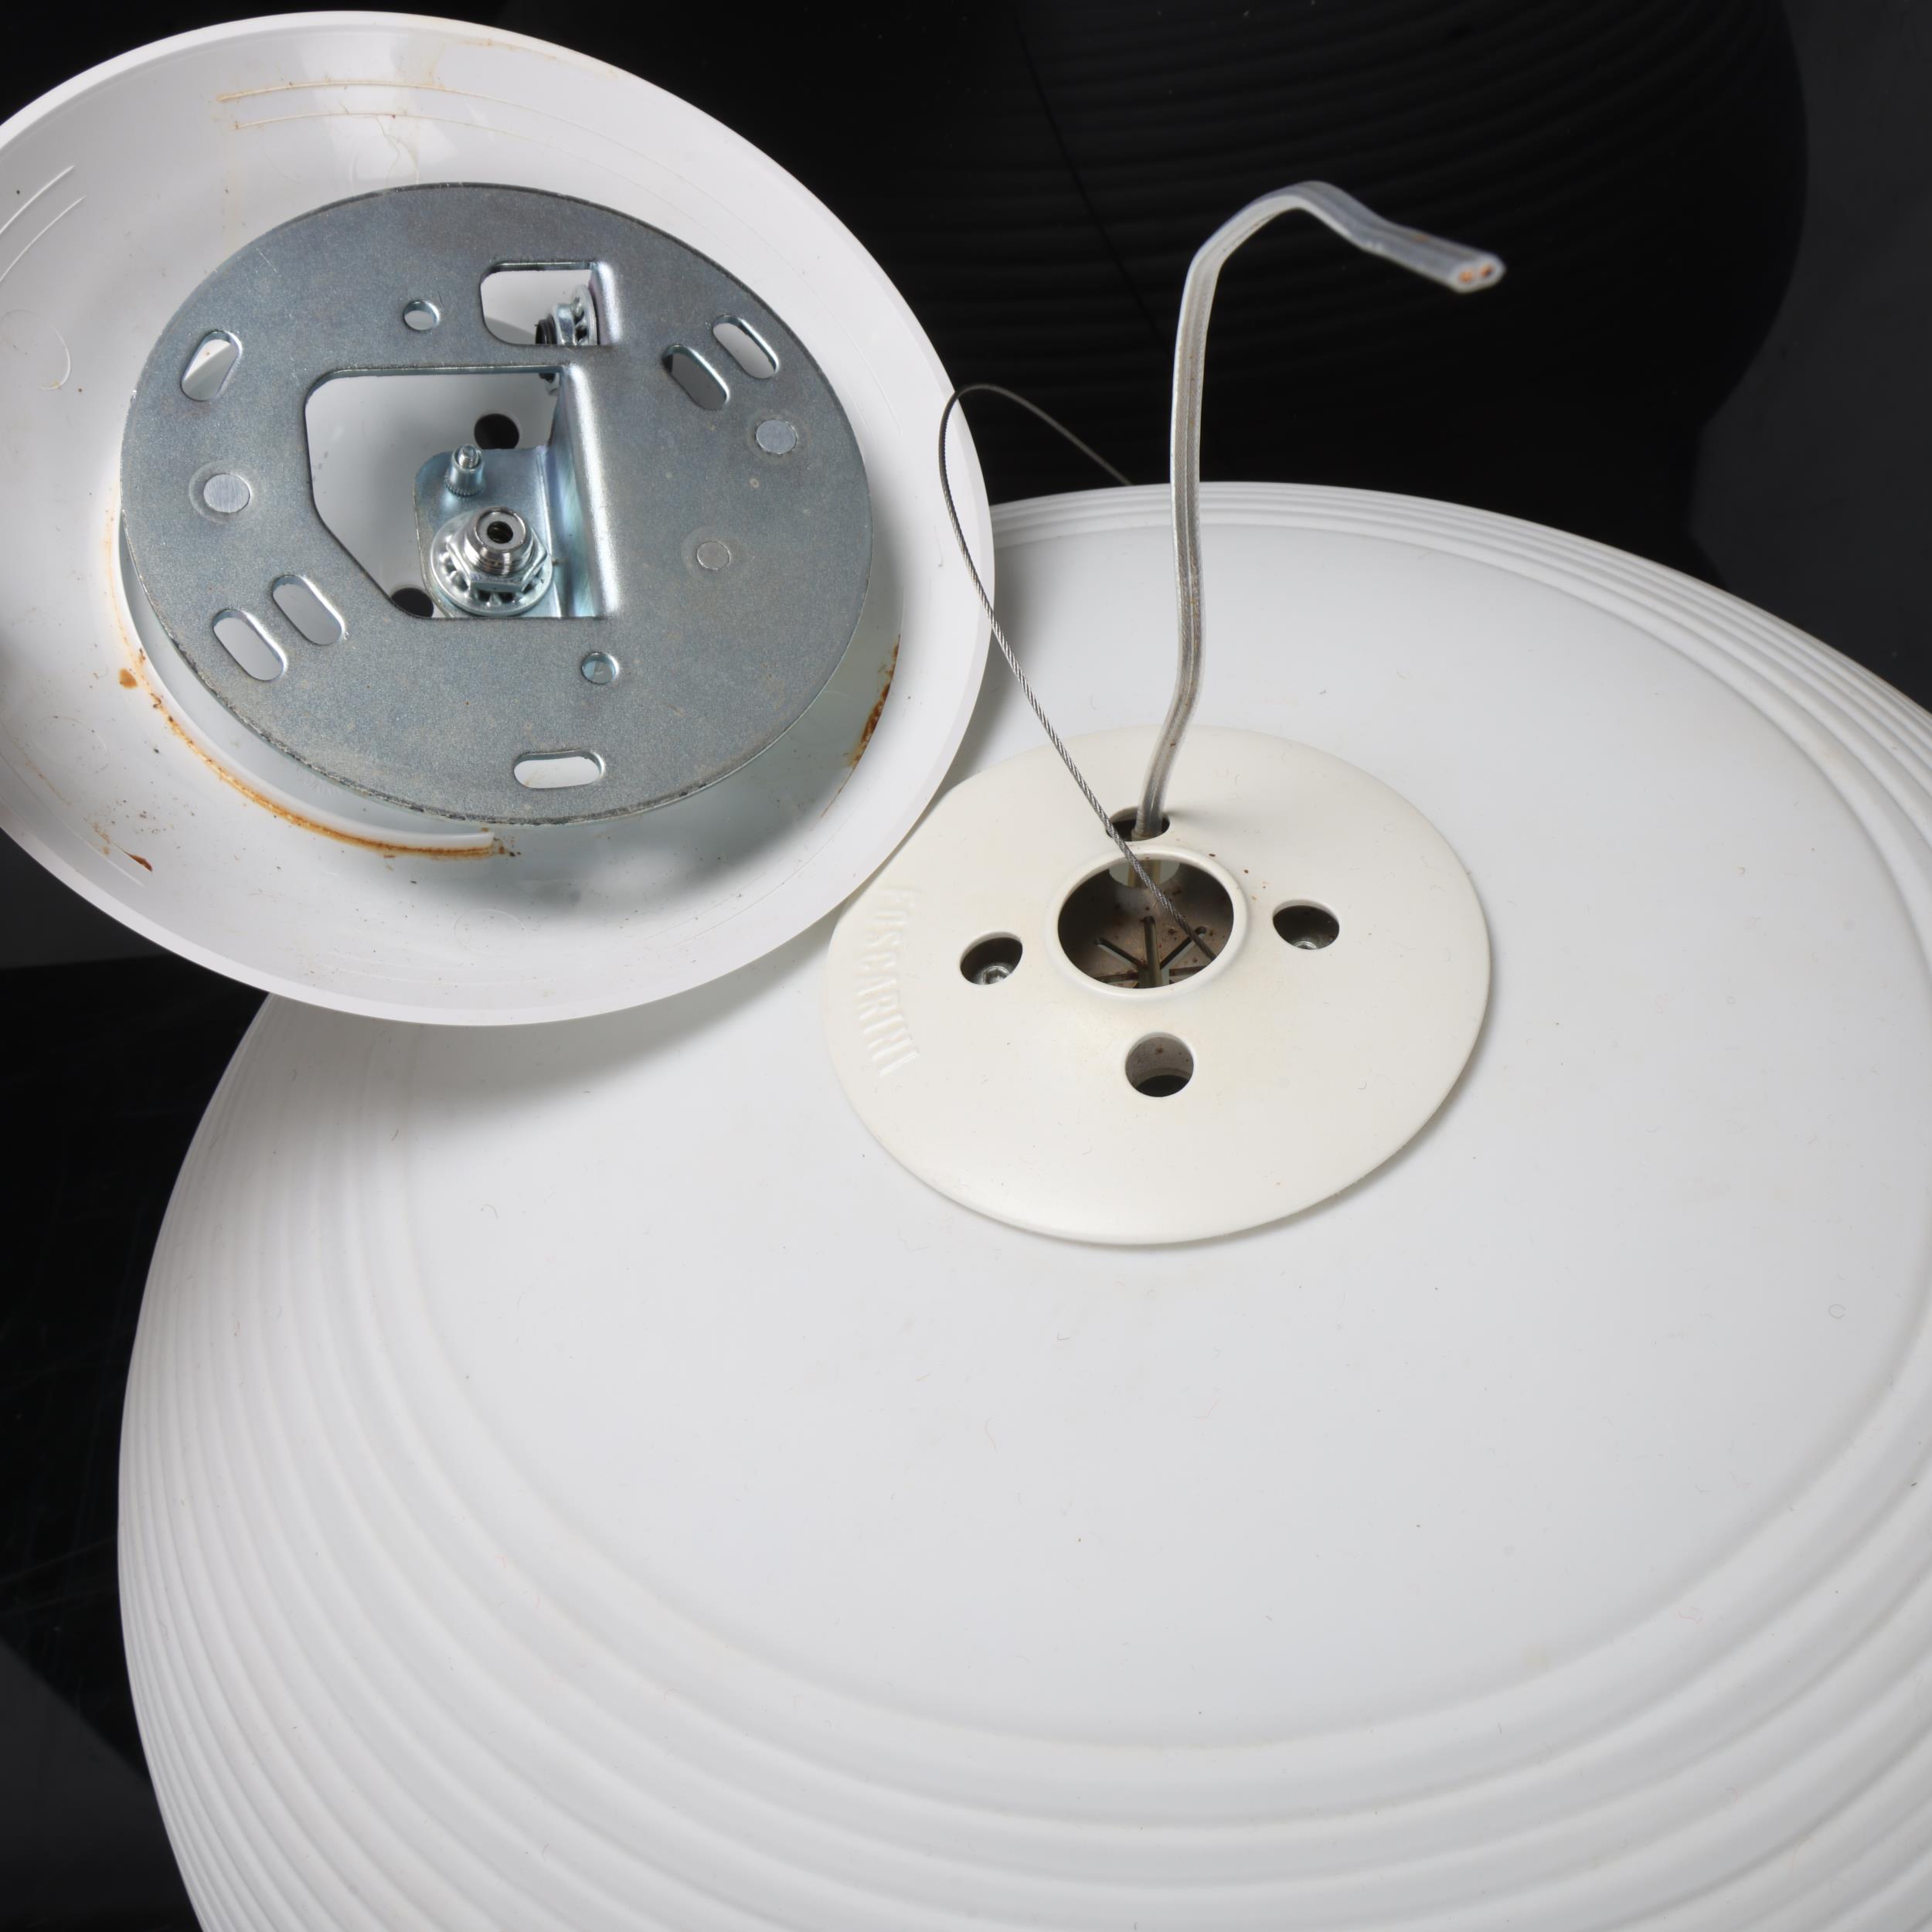 A Foscarini "Rituals" white glass pendant lamp, with white metal ceiling rose, diameter approx 35cm, - Image 2 of 3